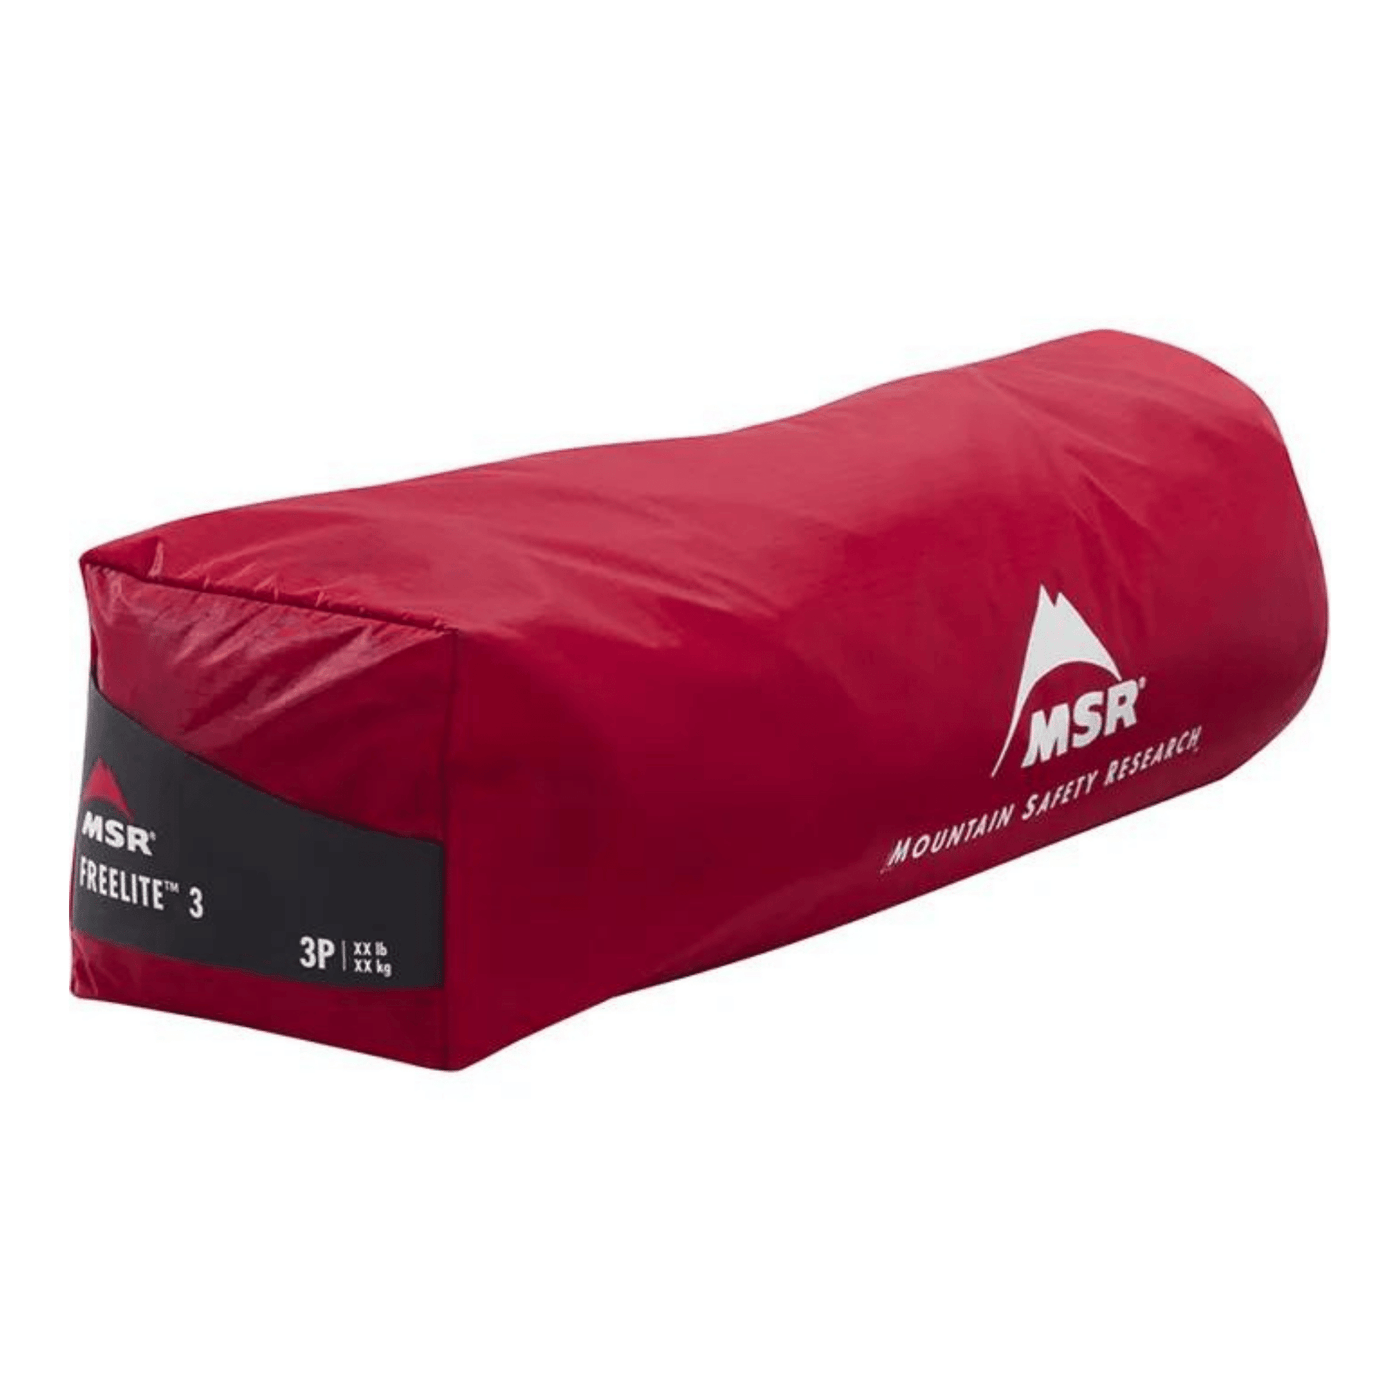 MSR Freelite 3 '22 Tent | Tramping 3 Person Backpacking Tent  | Further Faster Christchurch NZ